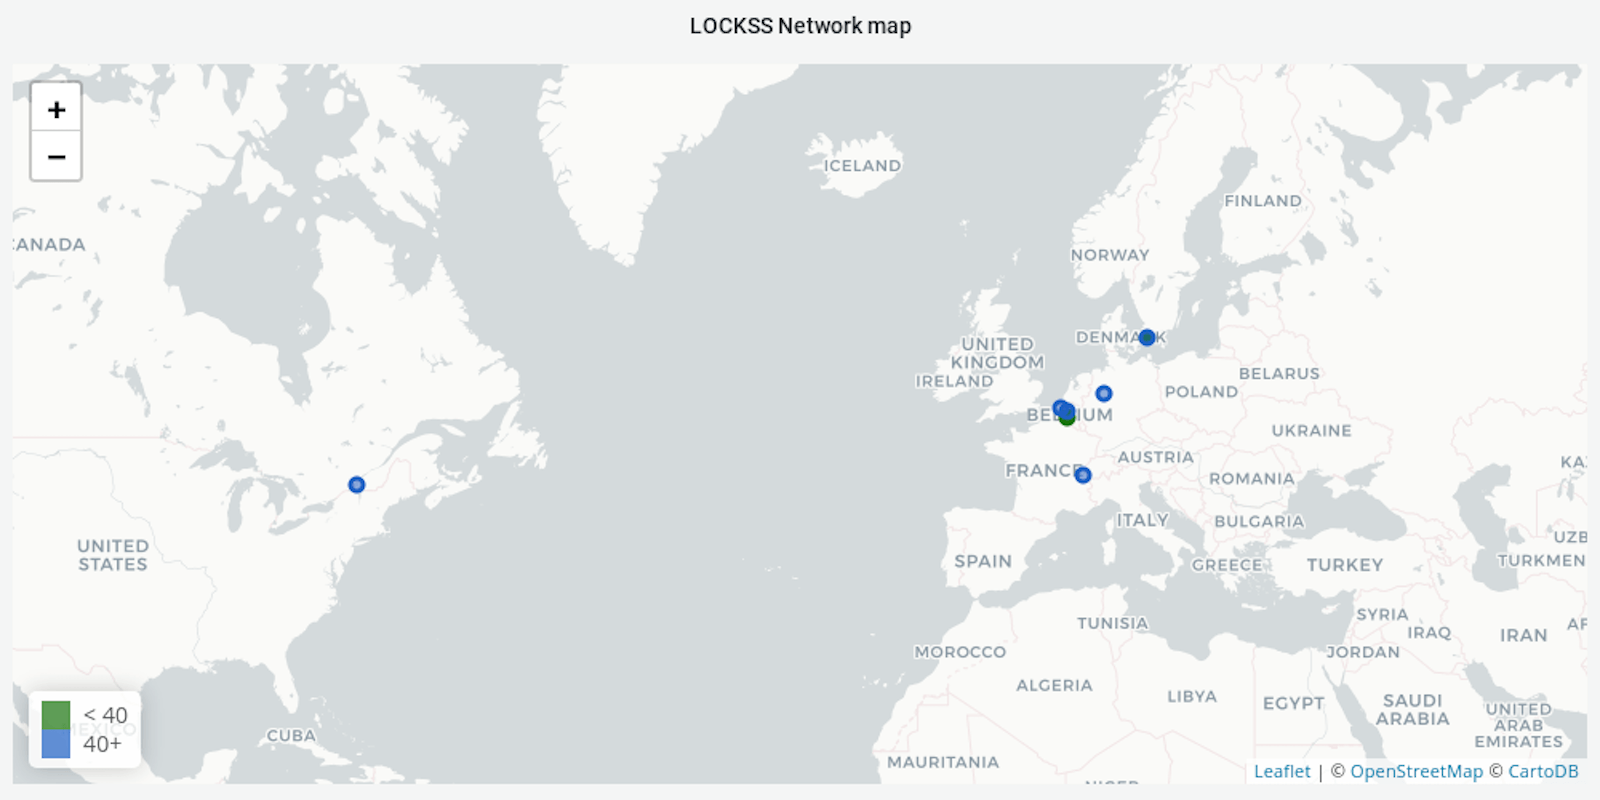 A screenshot of the LOCKSS Network map showing dots representing active LOCKSS boxes locations.